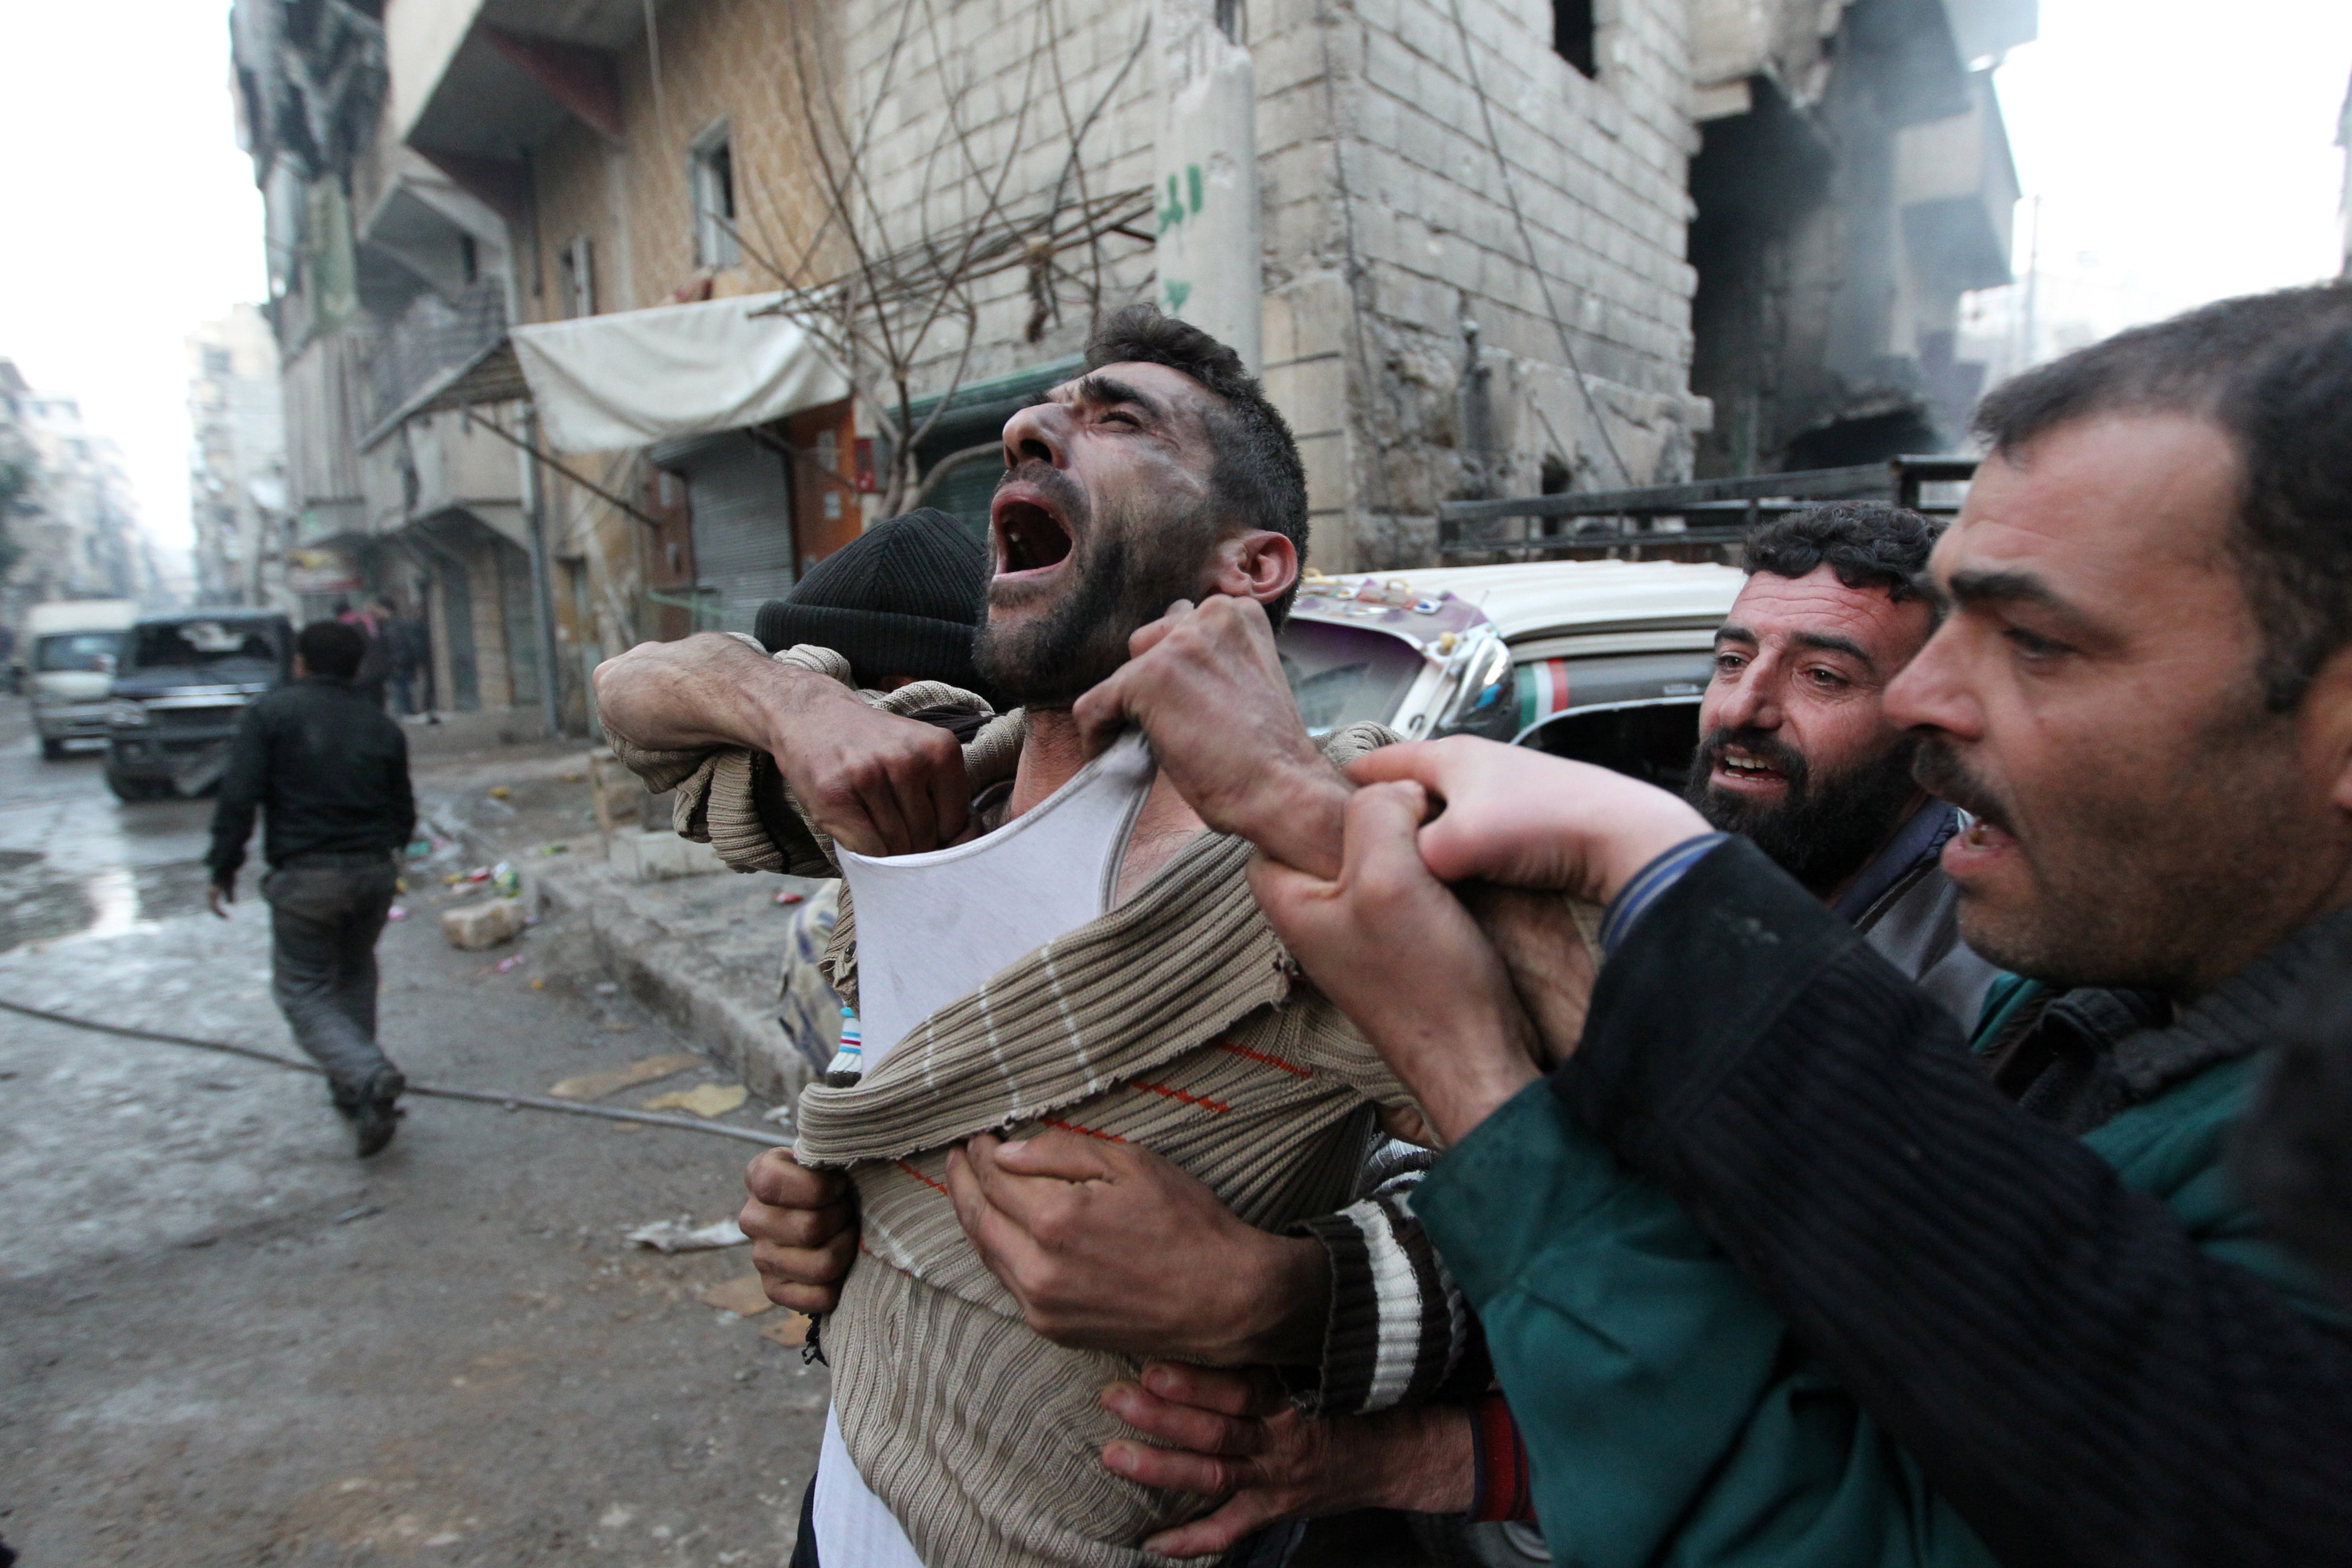 A father reacts after the death of two of his children, whom activists said were killed by shelling by forces loyal to Syria’s president Bashar al-Assad, at al-Ansari area in Aleppo, Syria in January 2013